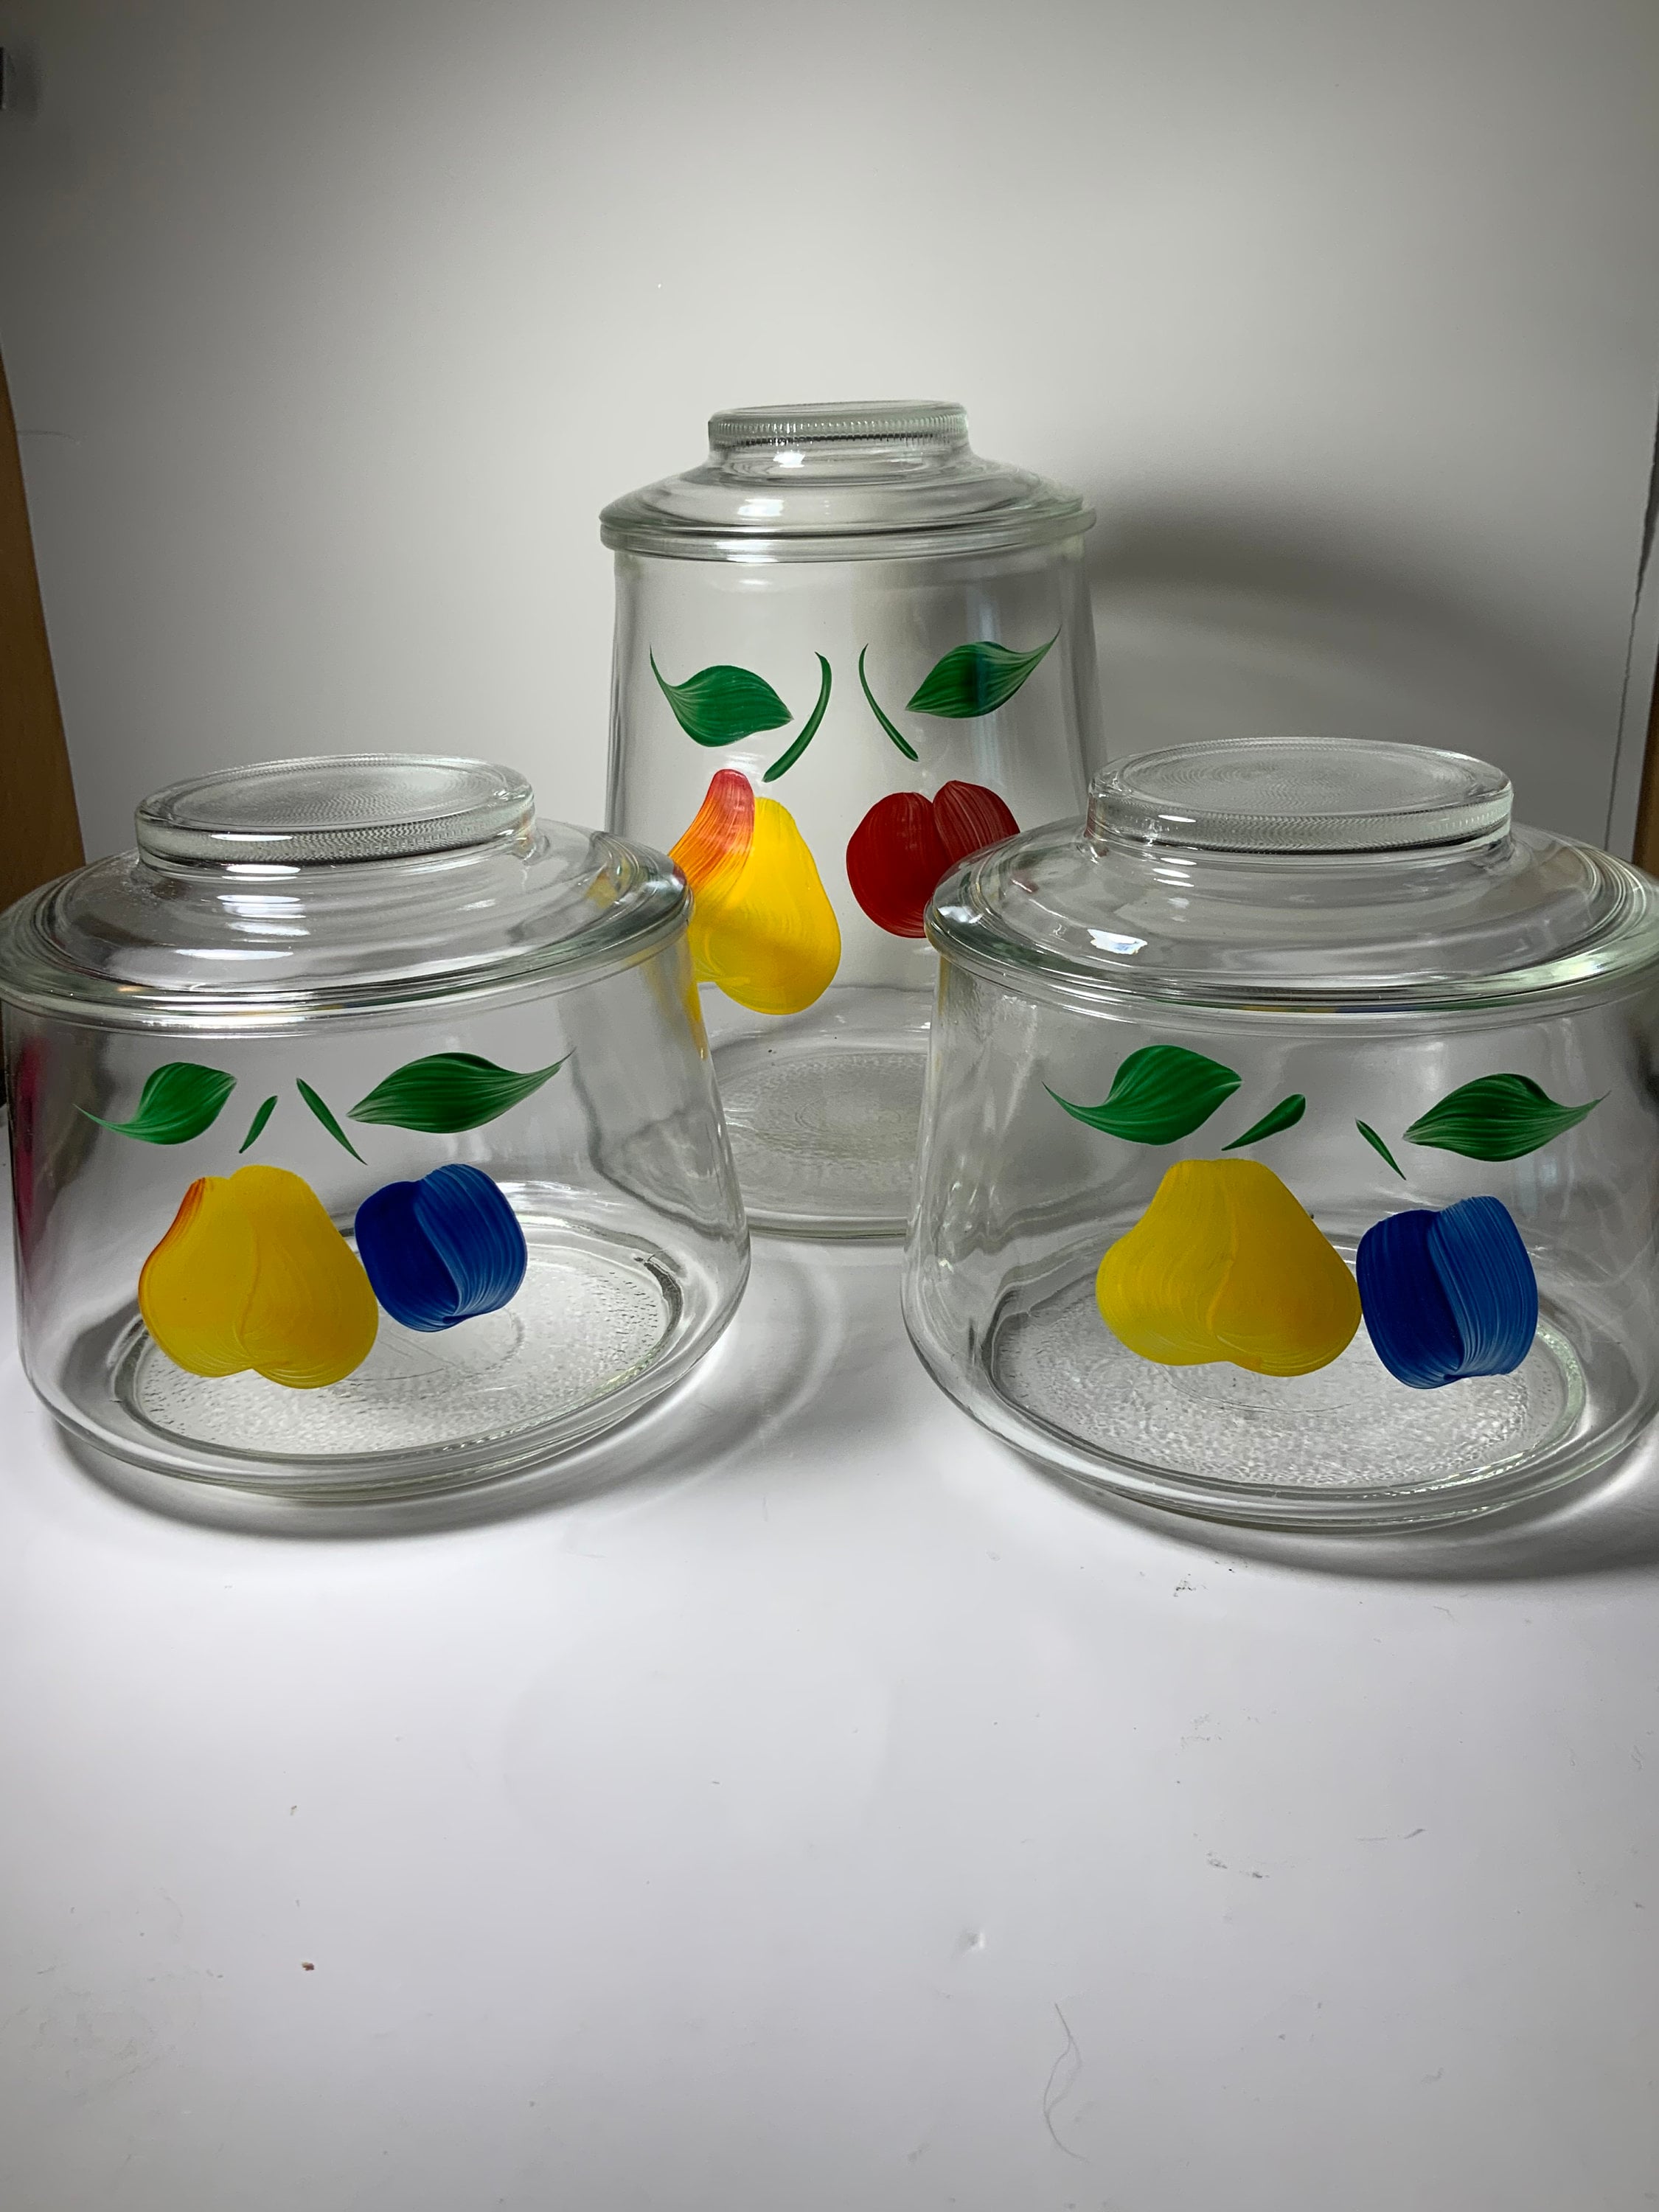 Vintage BARTLETT COLLINS COOKIE JAR CLEAR GLASS HAND PAINTED FRUIT